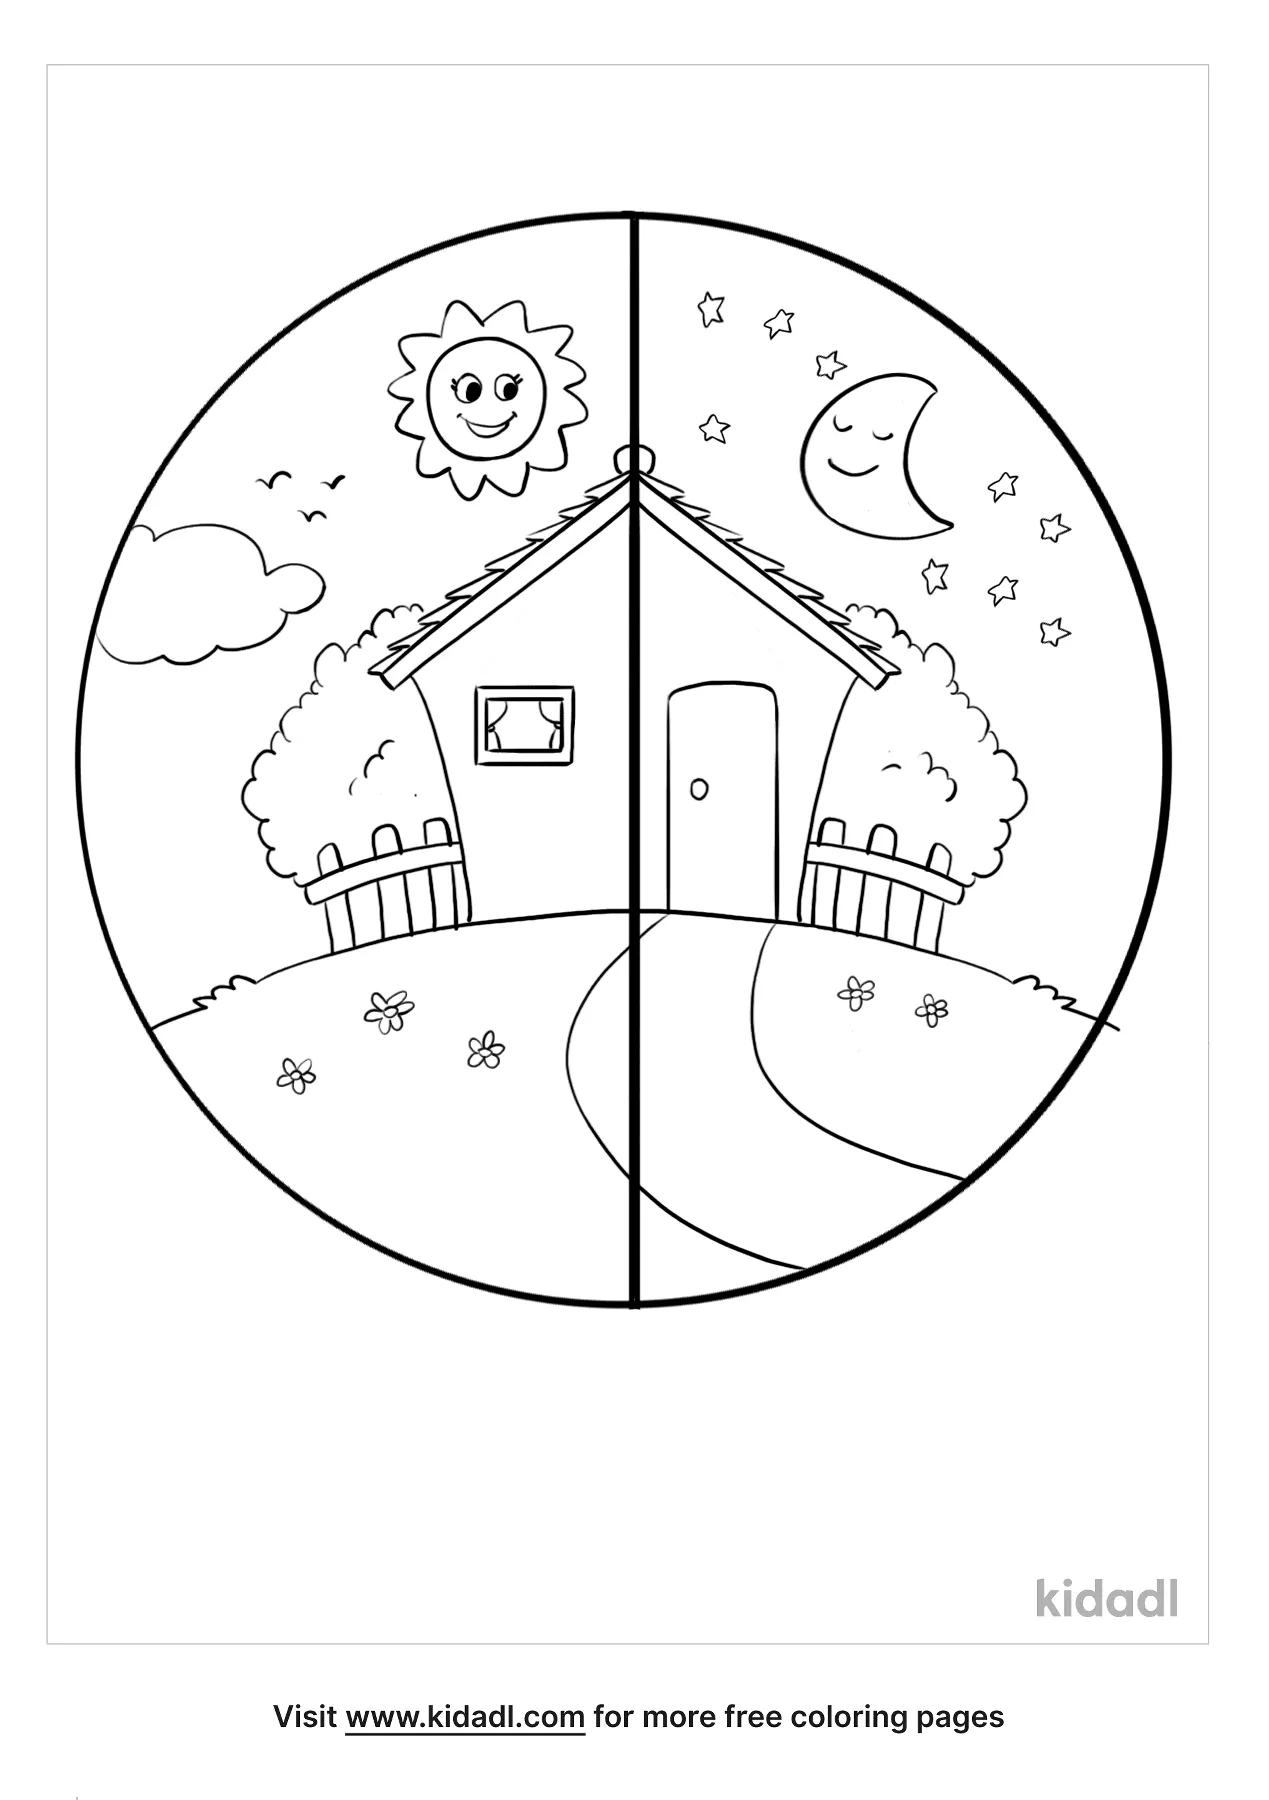 Free day and night coloring page coloring page printables